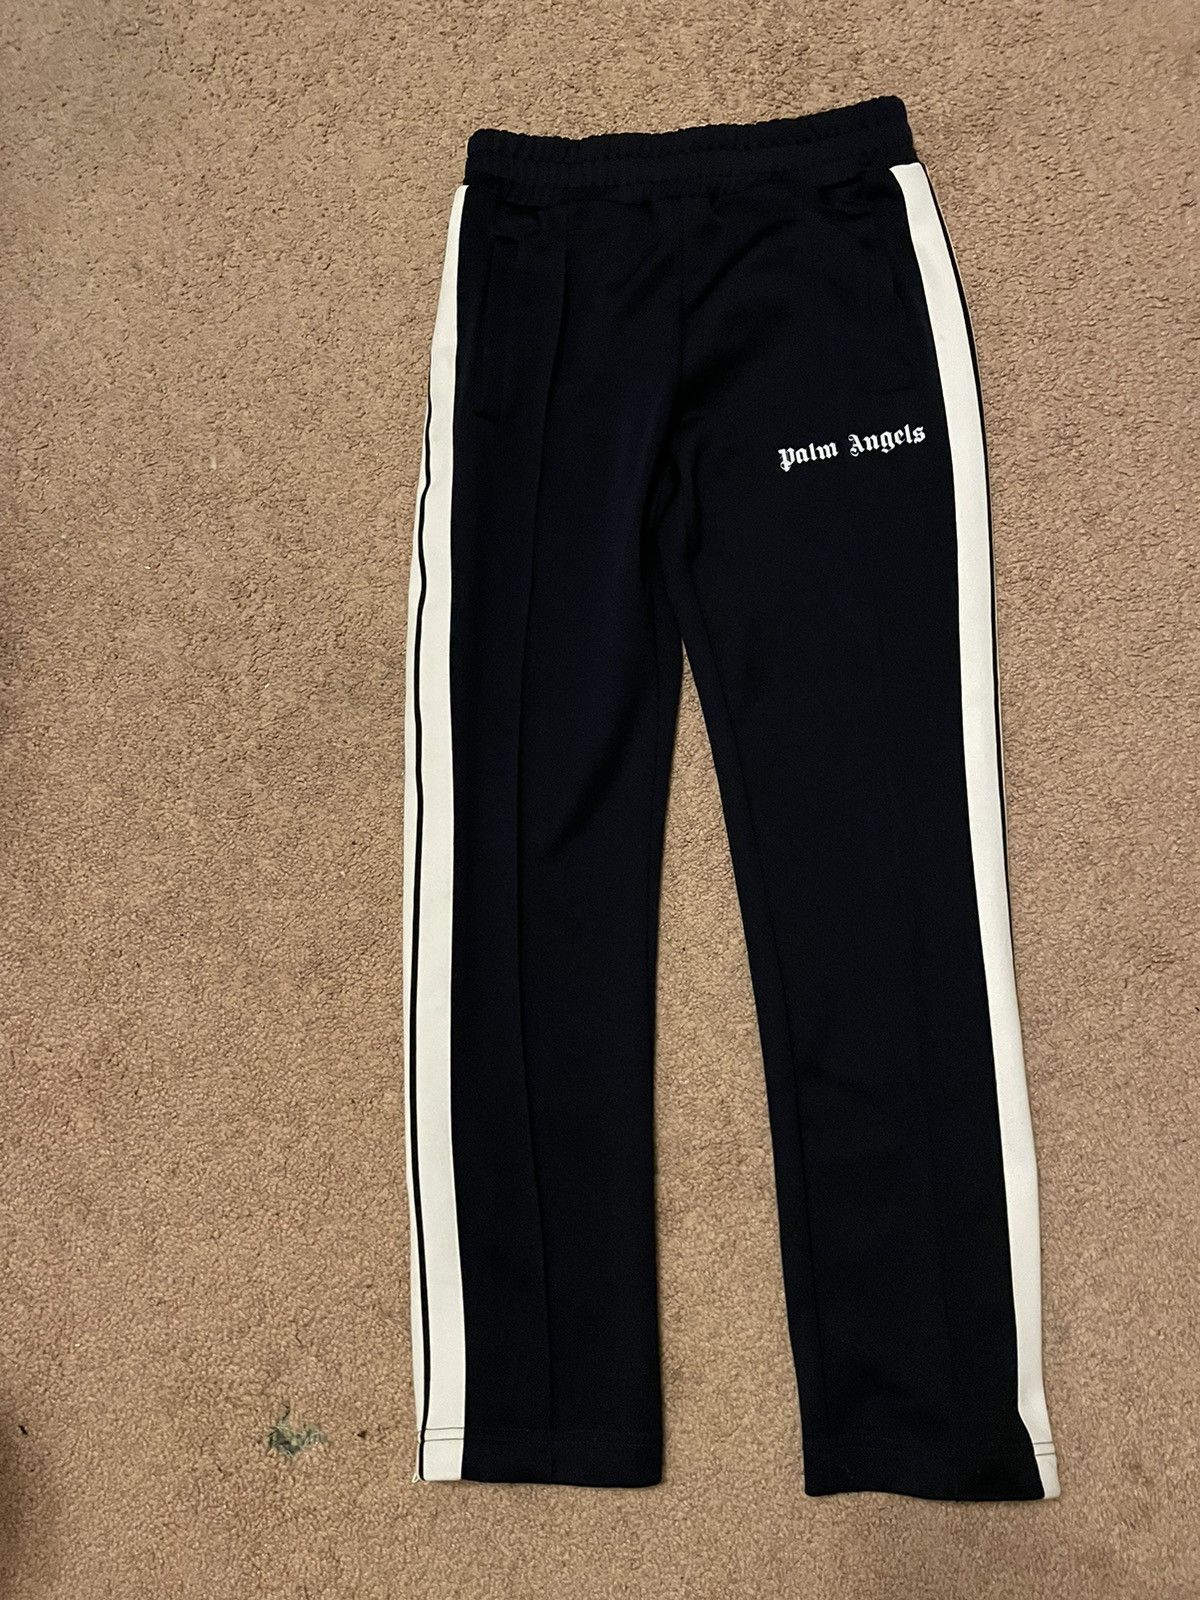 Pre-owned Palm Angels Navy Blue Track Pant